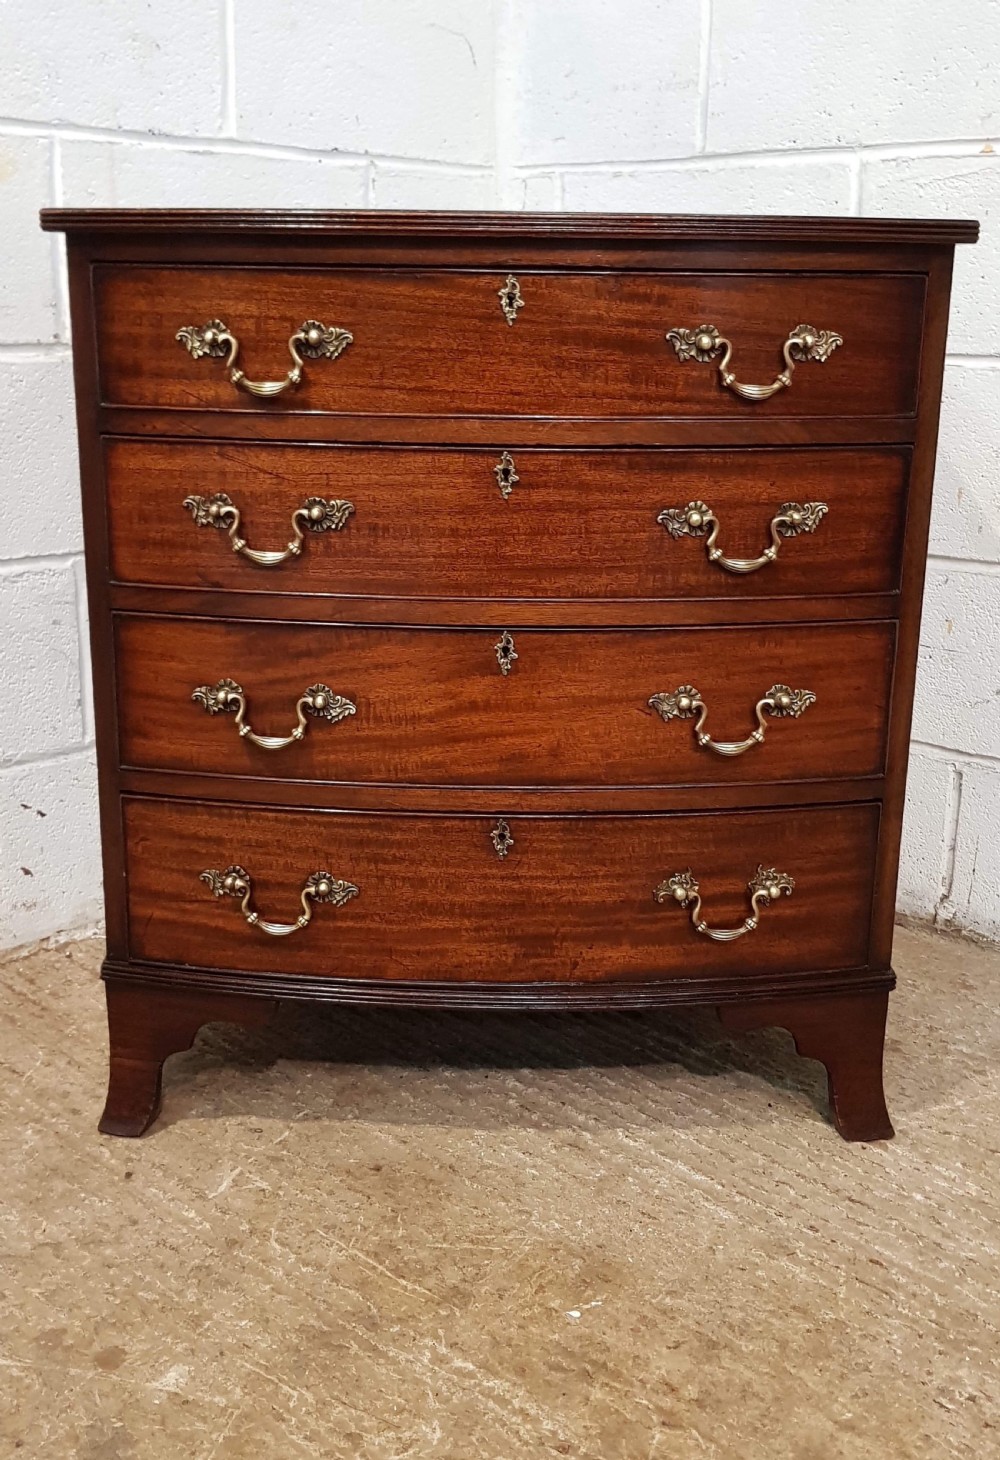 antique edwardian mahogany bow front dwarf chest of drawers c1900